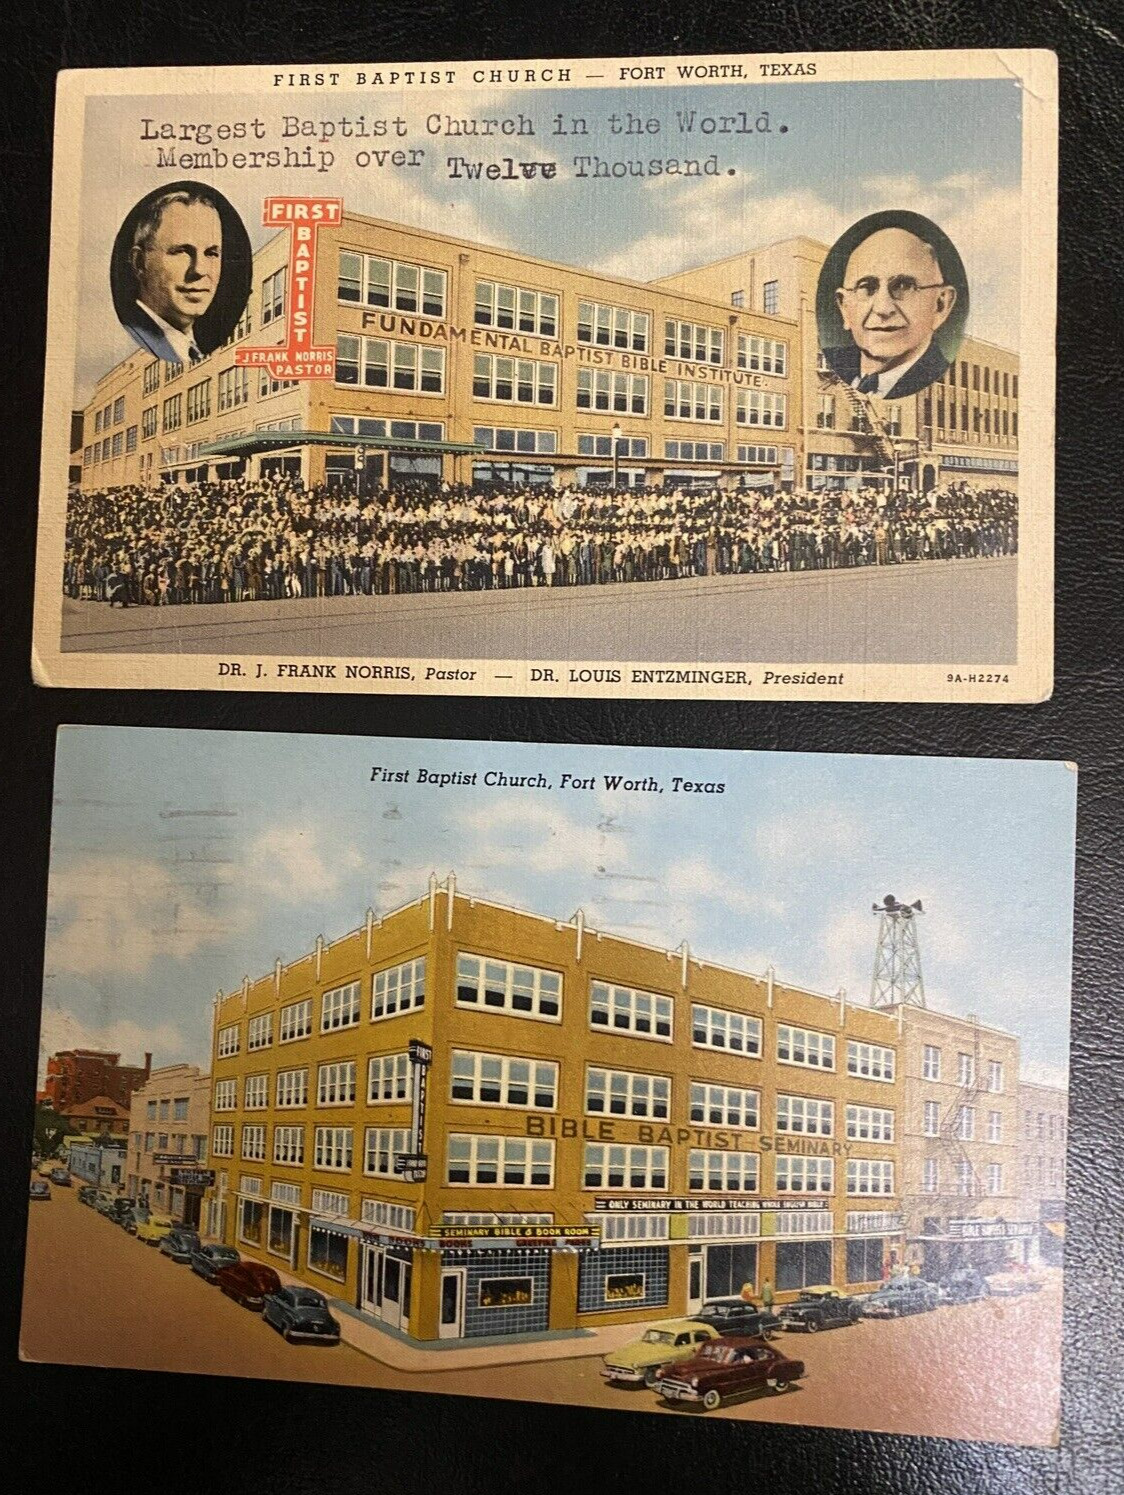 3 VINTAGE POSTCARDS-FIRST BAPTIST CHURCH,FT WORTH,TX.  OVER 12,000 MEMBERS.